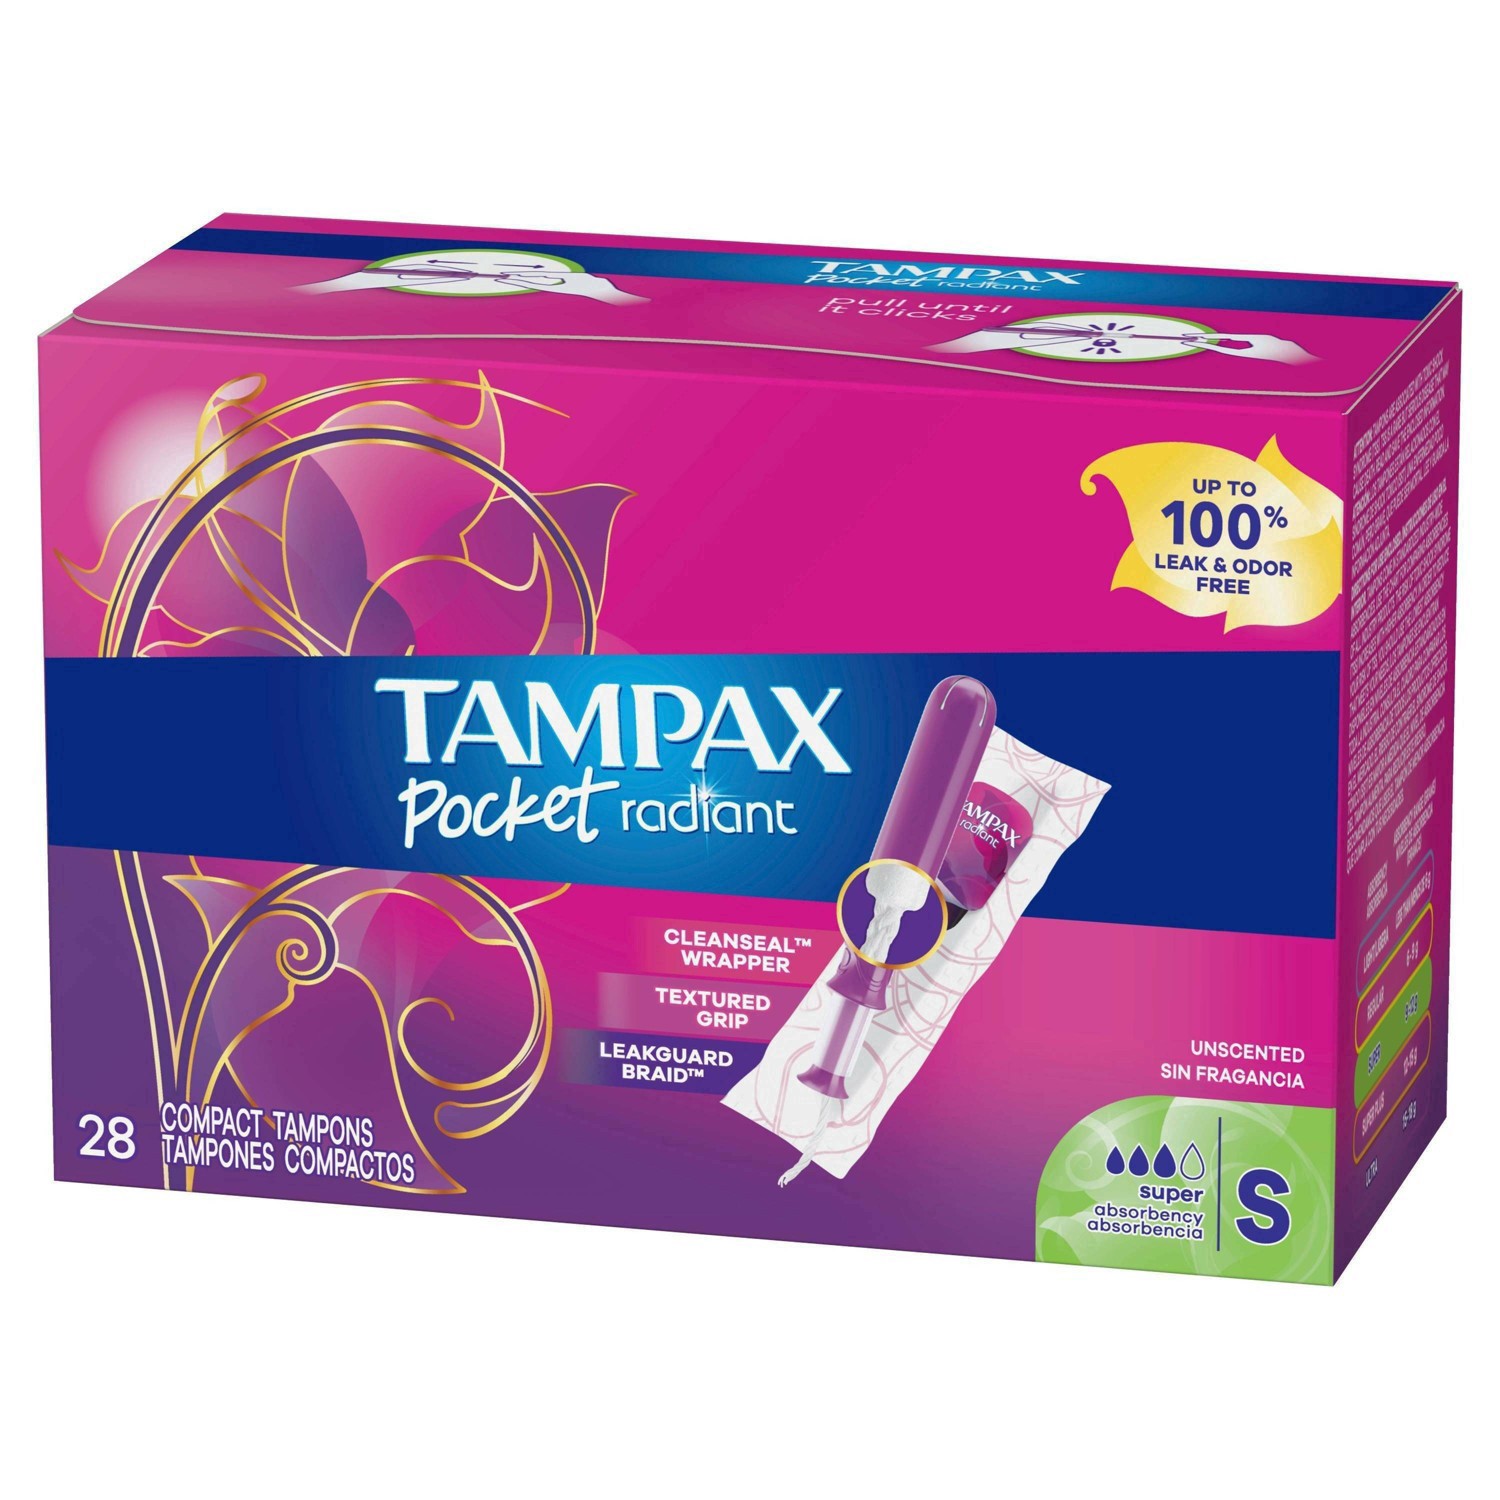 slide 18 of 94, Tampax Pocket Radiant Compact Plastic Tampons, With LeakGuard Braid, Super Absorbency, Unscented, 28 Count, 28 ct